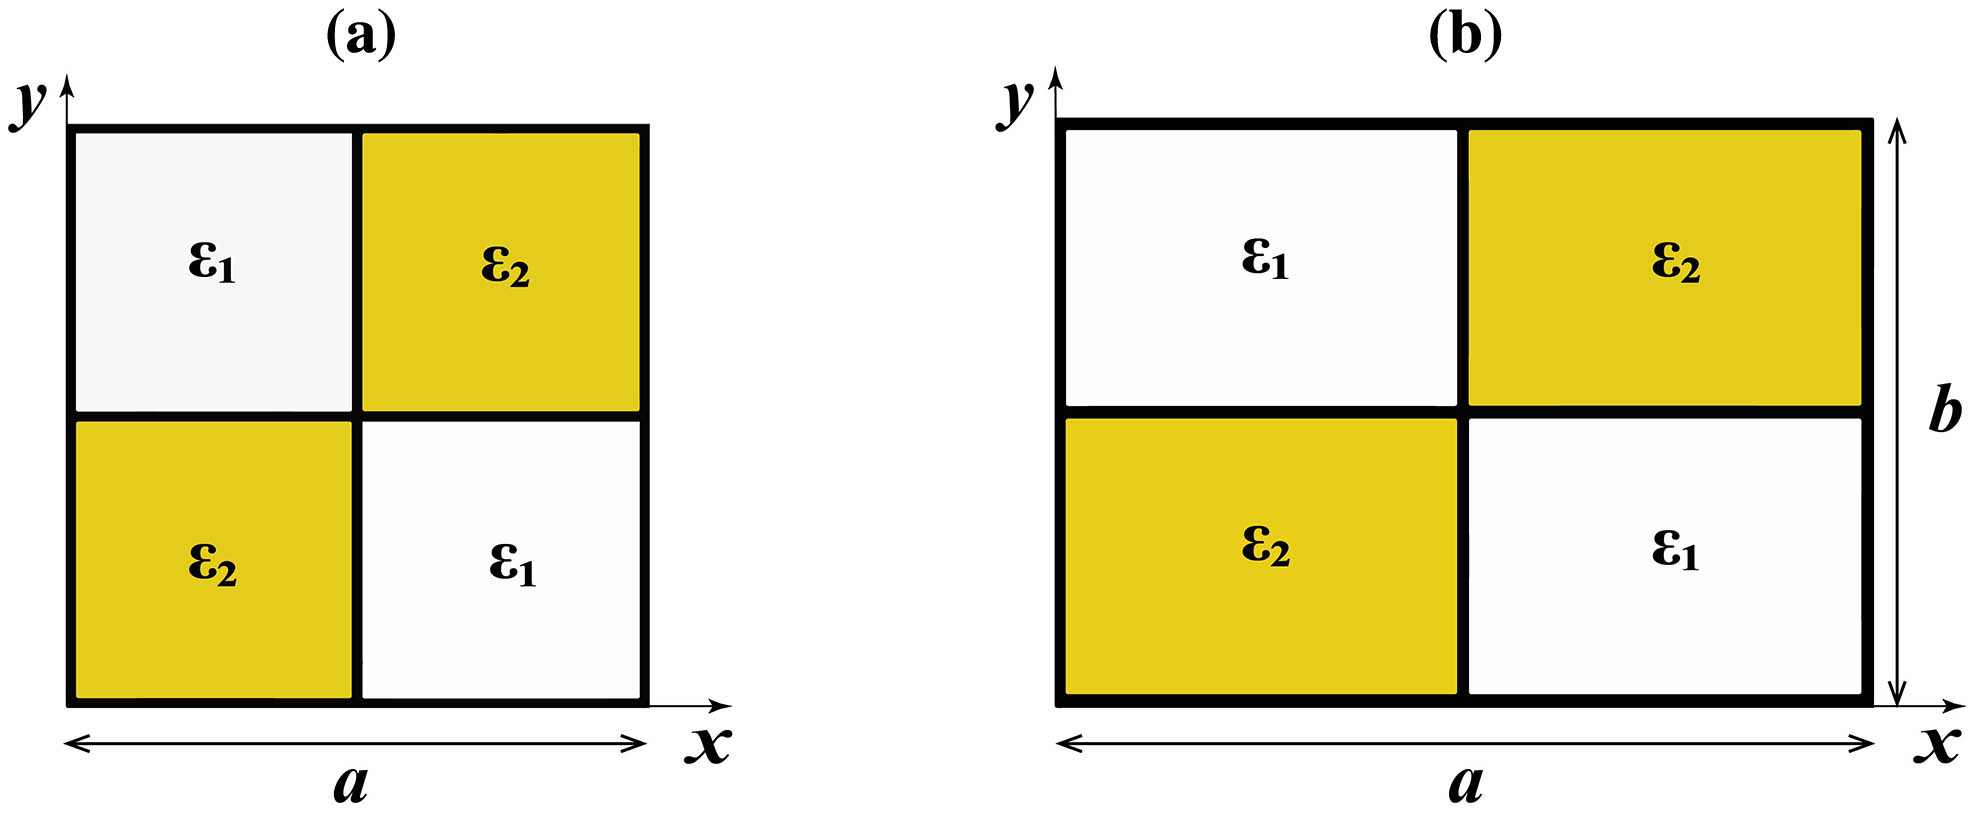 (a) Square CS with a period a. (b) Rectangular CS with a period a along the x direction and a period b along the y direction. The permittivity of the yellow region and white region is ϵ1 and ϵ2, respectively.